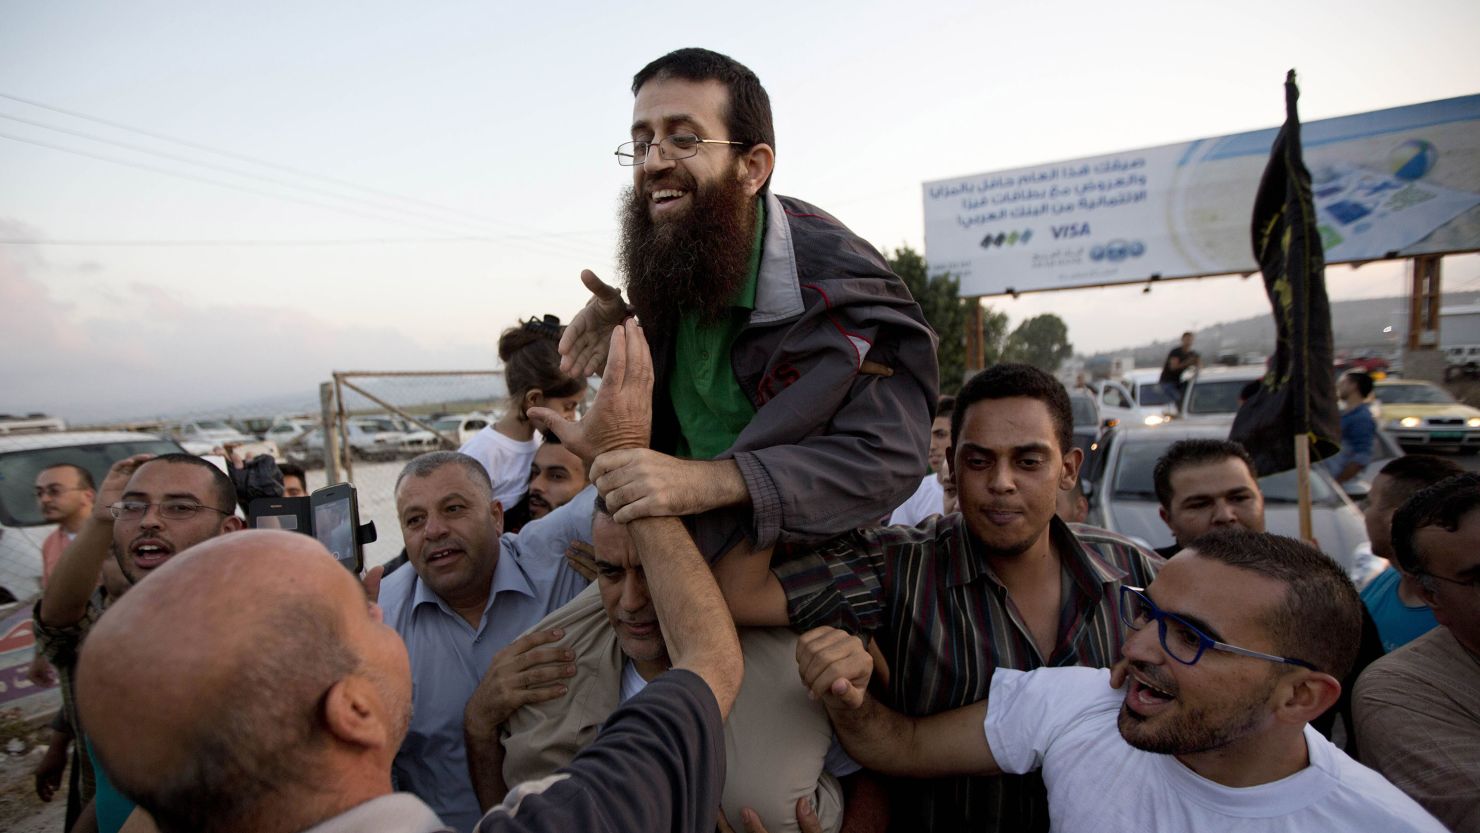 Palestinian Khader Adnan, center, is greeted by Palestinians after his release from an Israeli prison in the West Bank village of Arrabeh near Jenin on July 12, 2015.